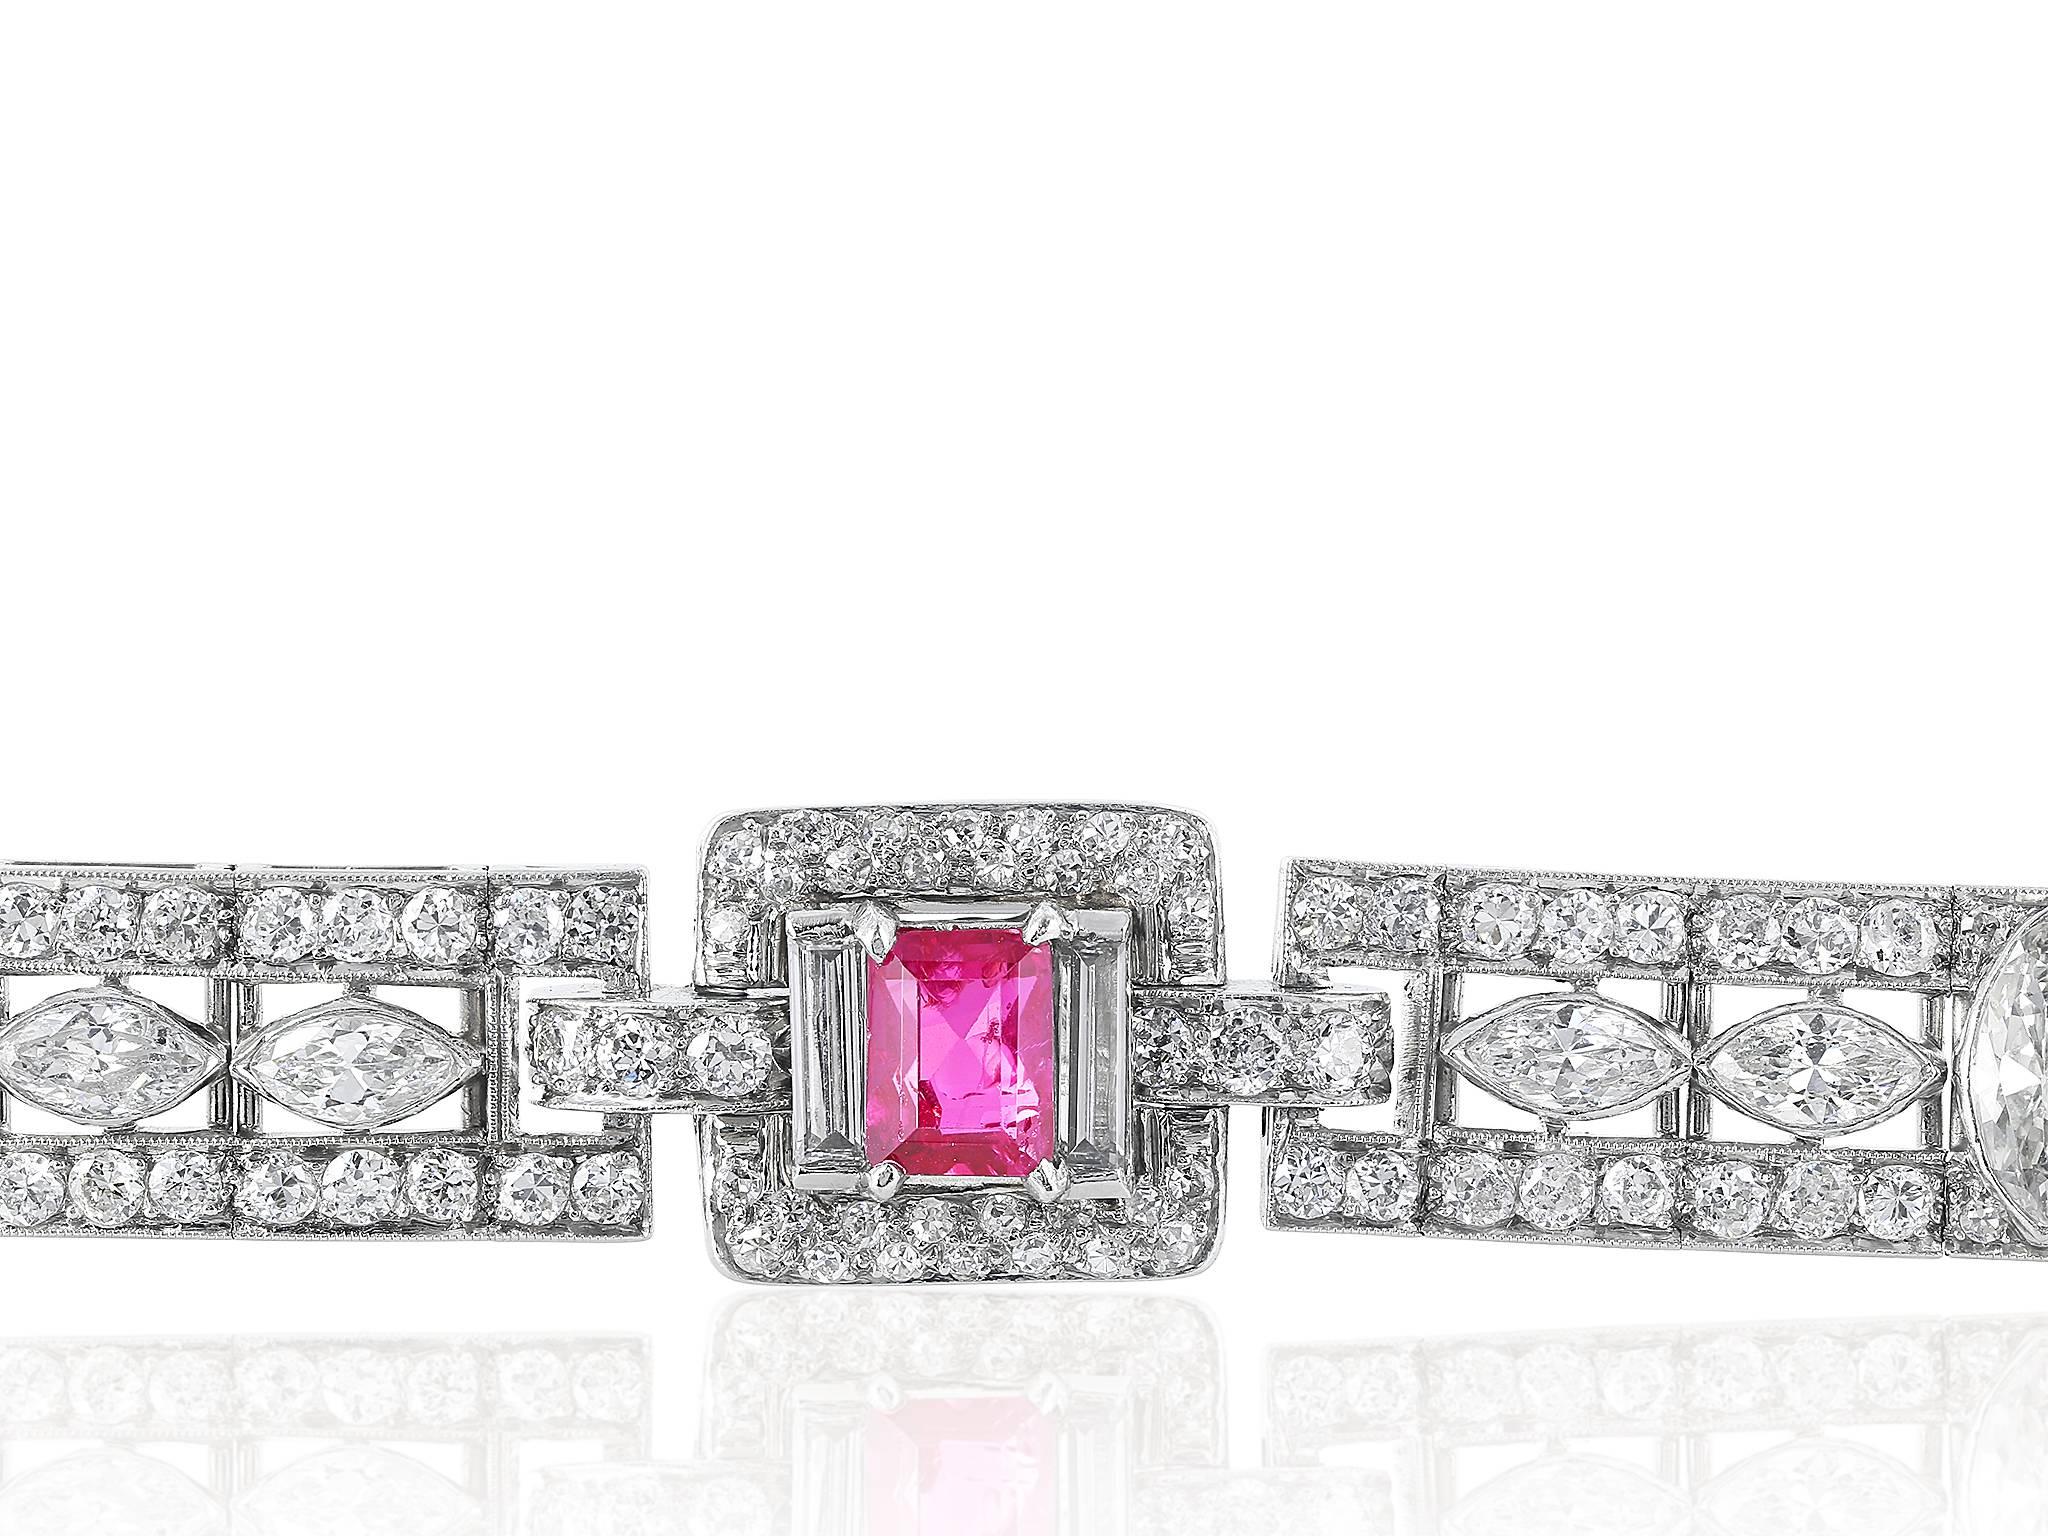 Platinum Art Deco bracelet consisting of 3 emerald cut rubies having a total weight of approximately 4.50 carats set with approximately 11.50 carats of diamond.